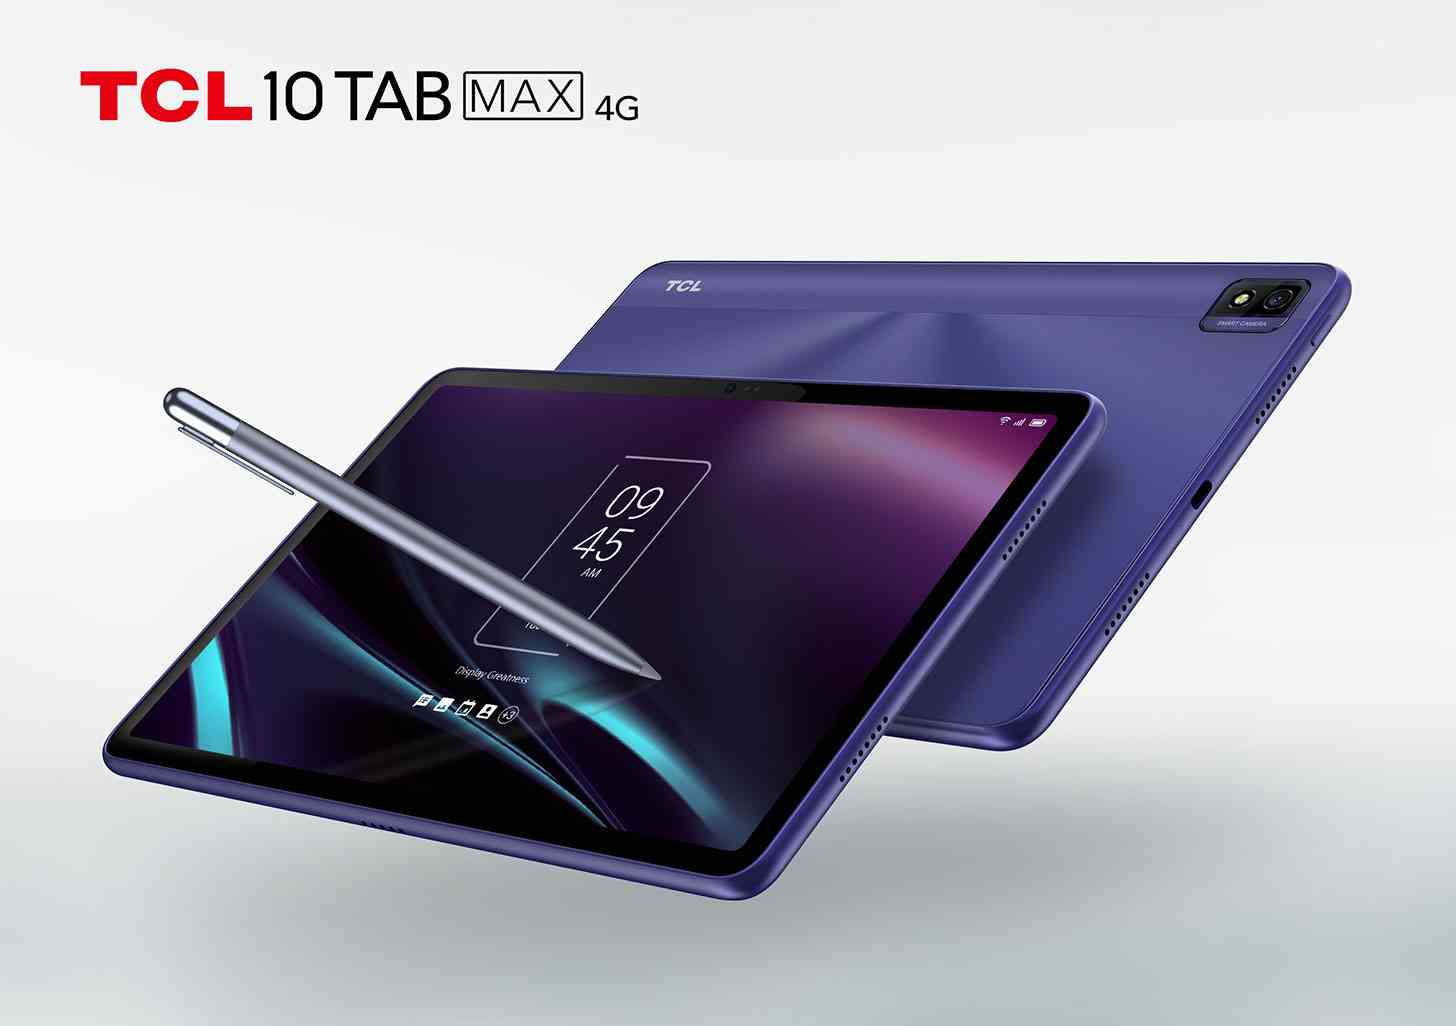 TCL 10 Tab Max official